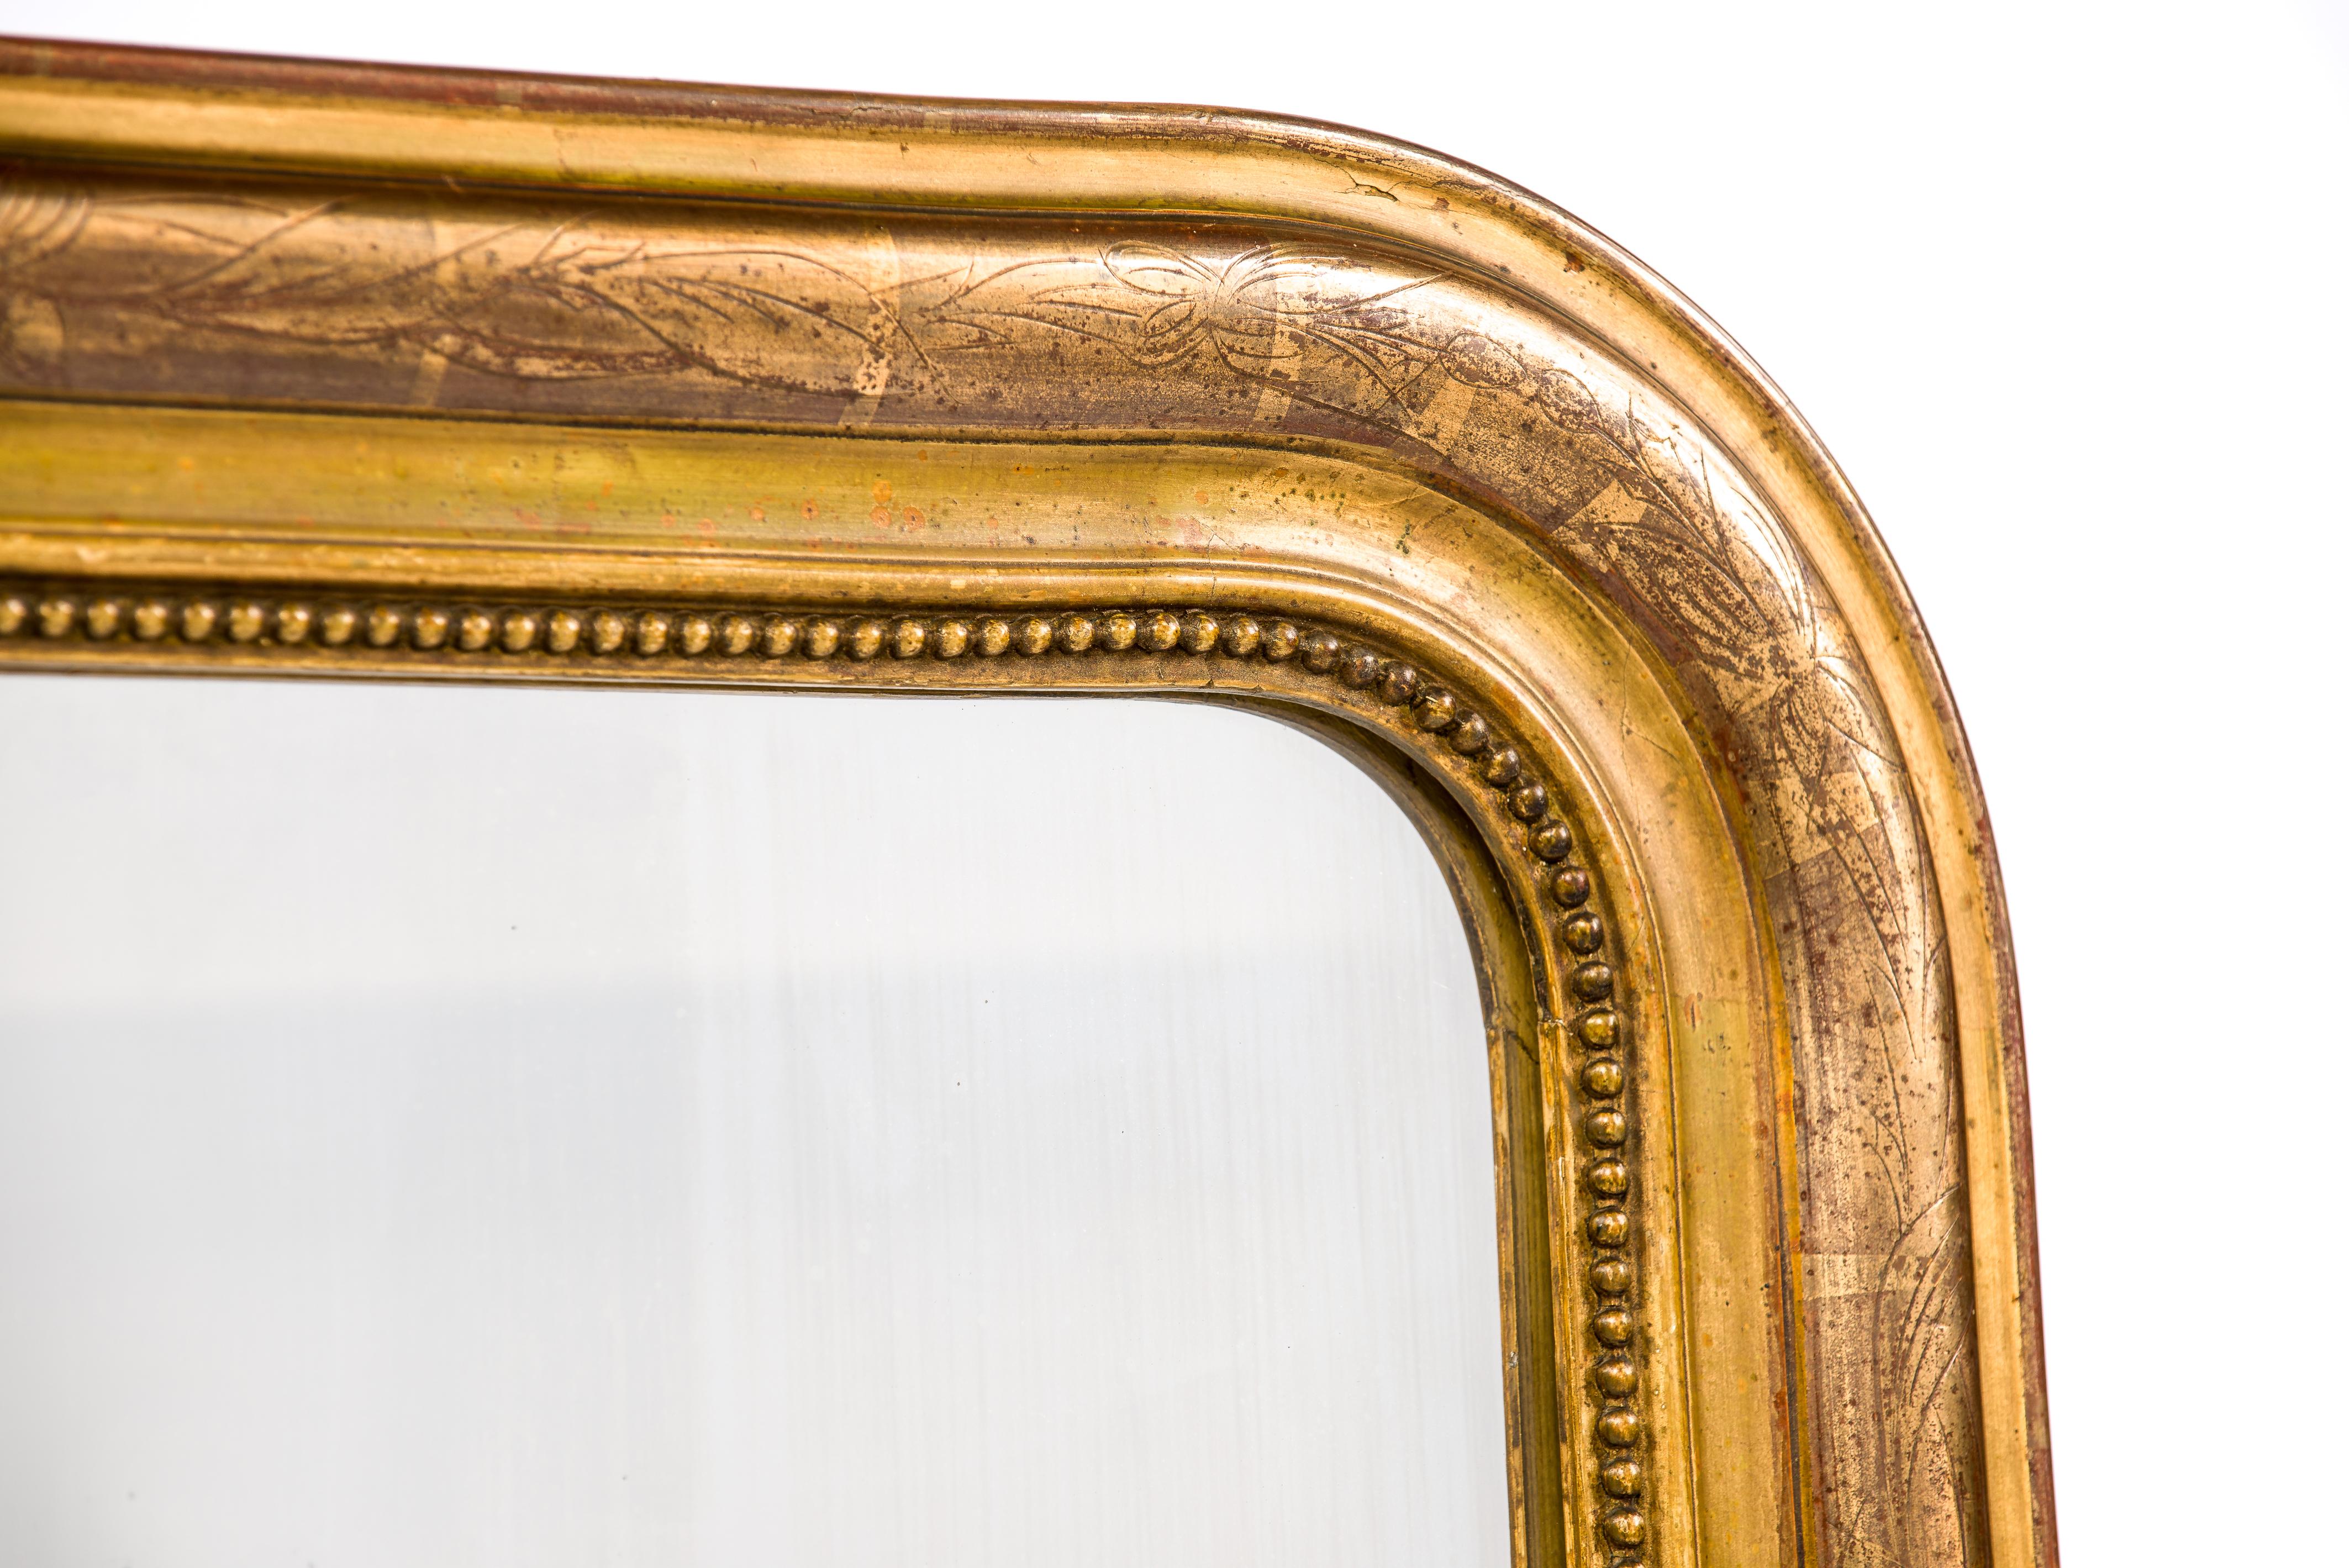 This beautiful antique mirror was made in France in august 1903. It features the upper rounded corners typical for the Louis Philippe style. The mirror has a solid pine frame that was smoothened with gesso. The most elevated part was engraved with a